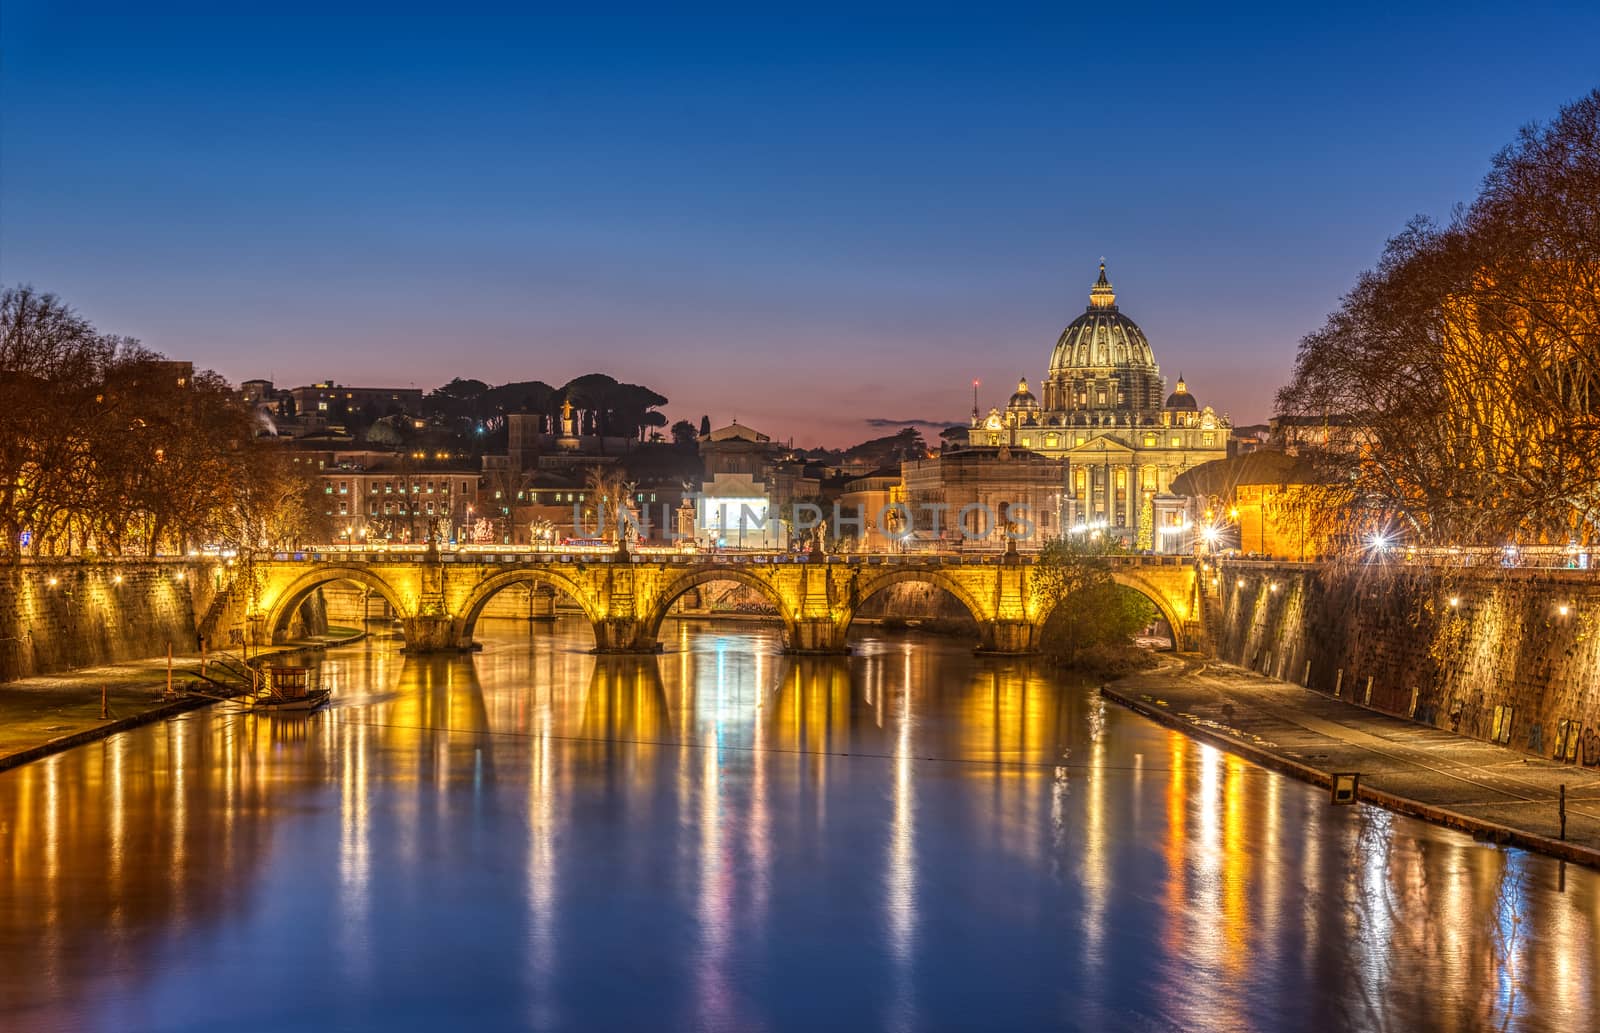 The Tiber river and St. Peters Basilica in the Vatican City, Italy, at twilight